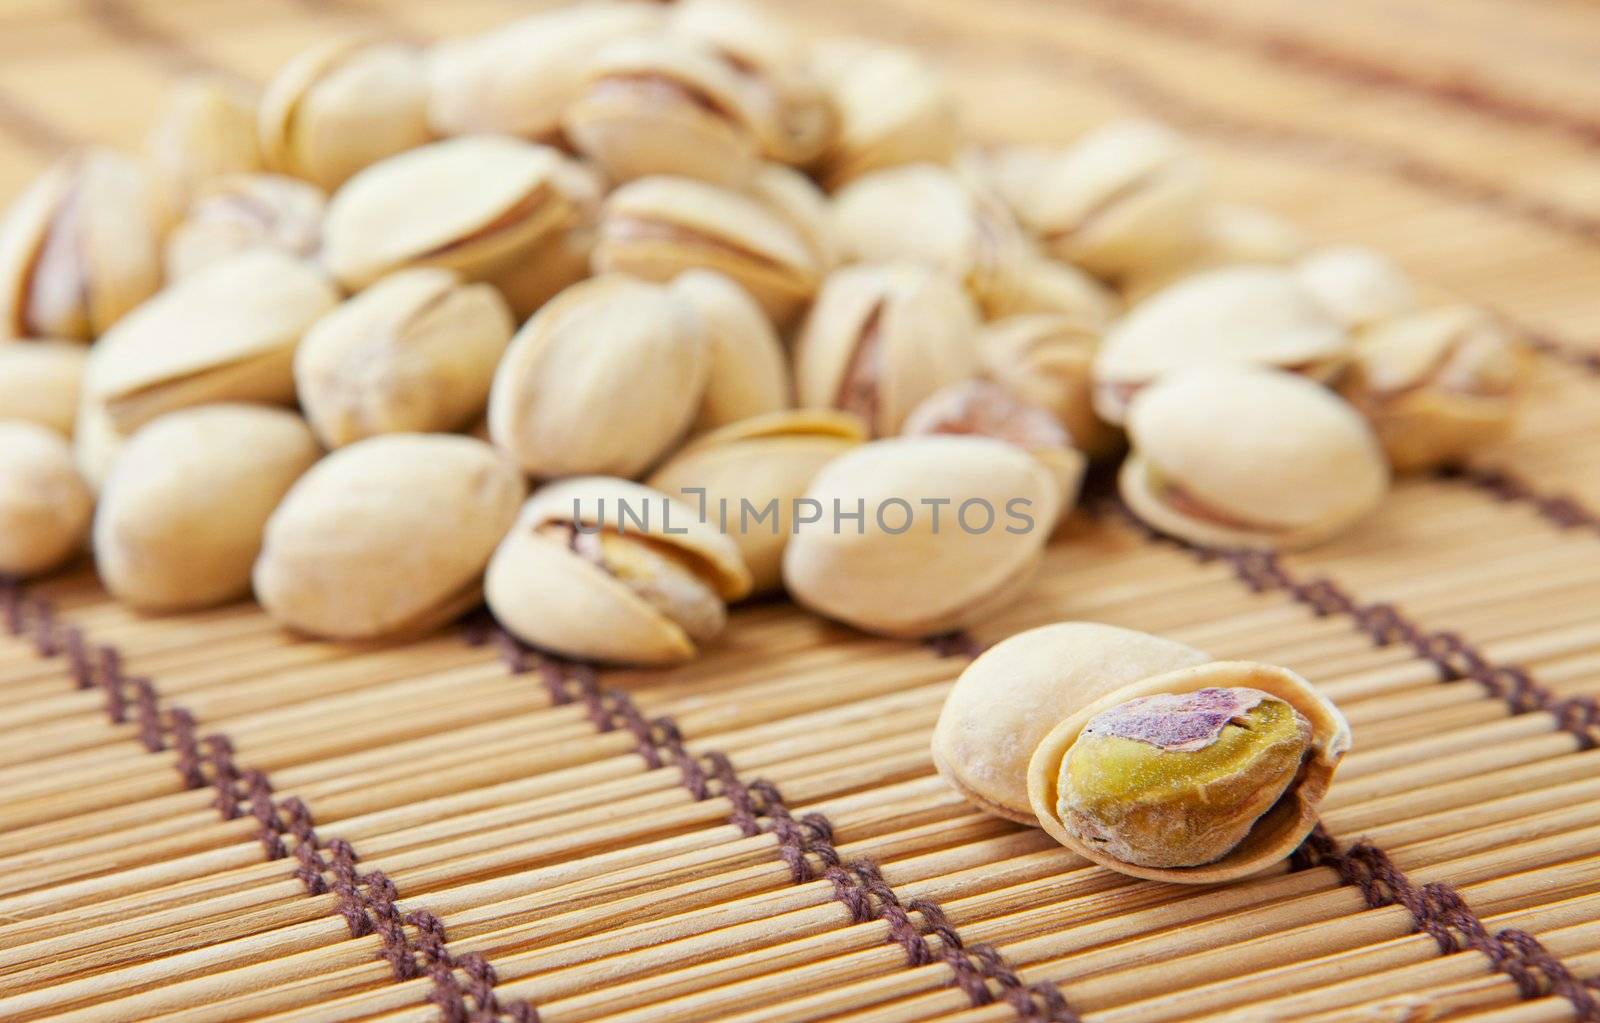 Dried pistachios by witthaya